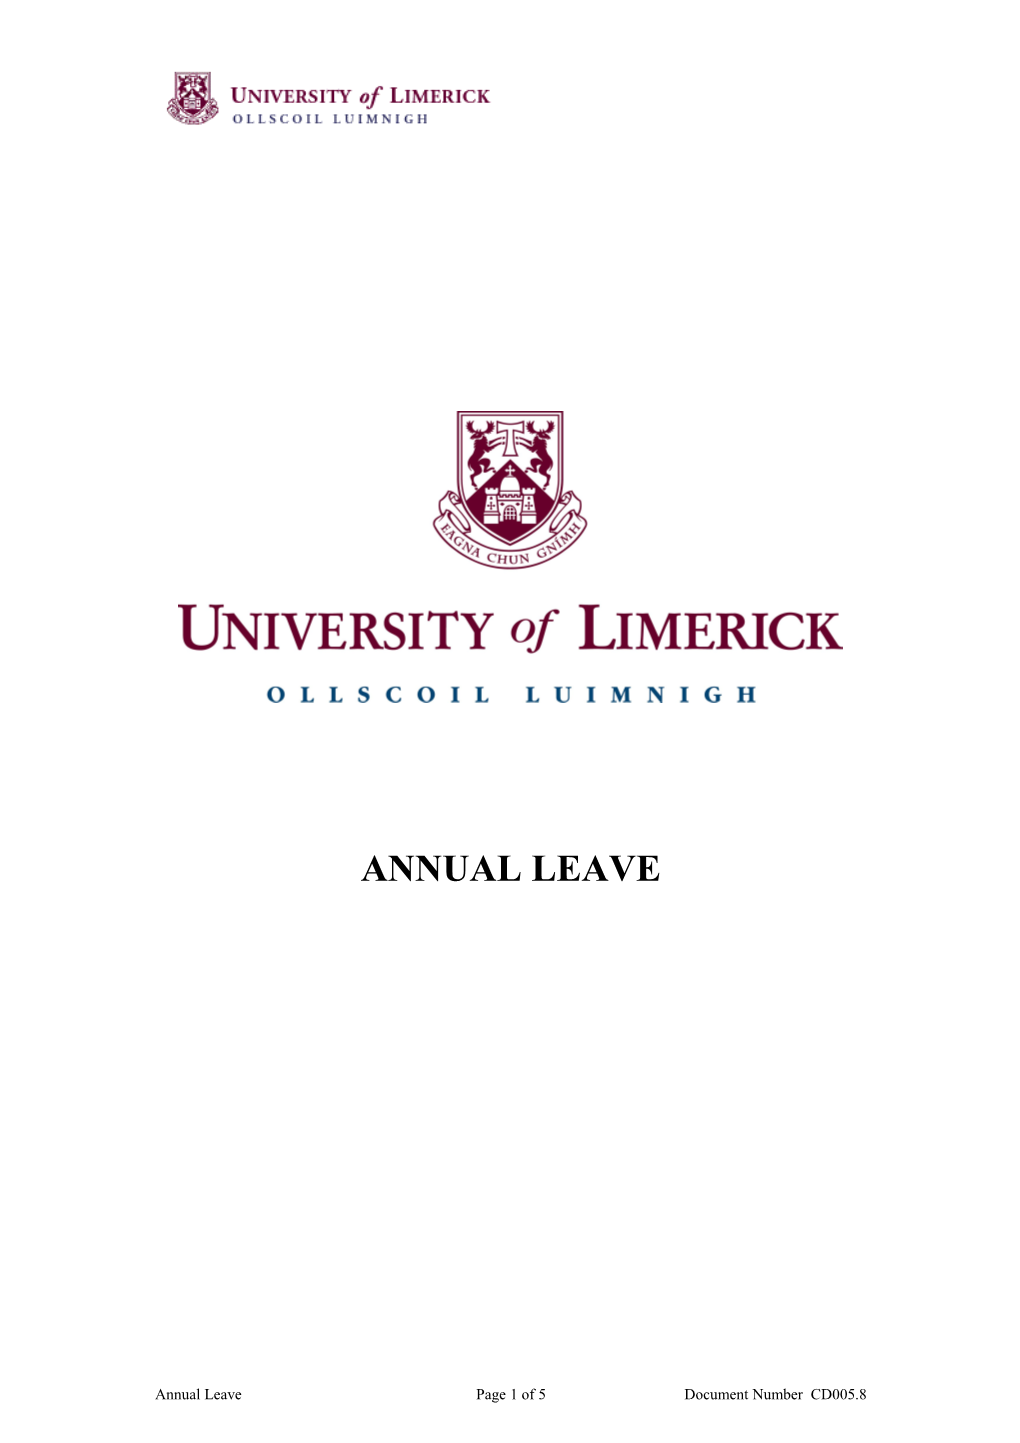 2.1 All Employees of the University of Limerick Are Entitled to Annual Leave